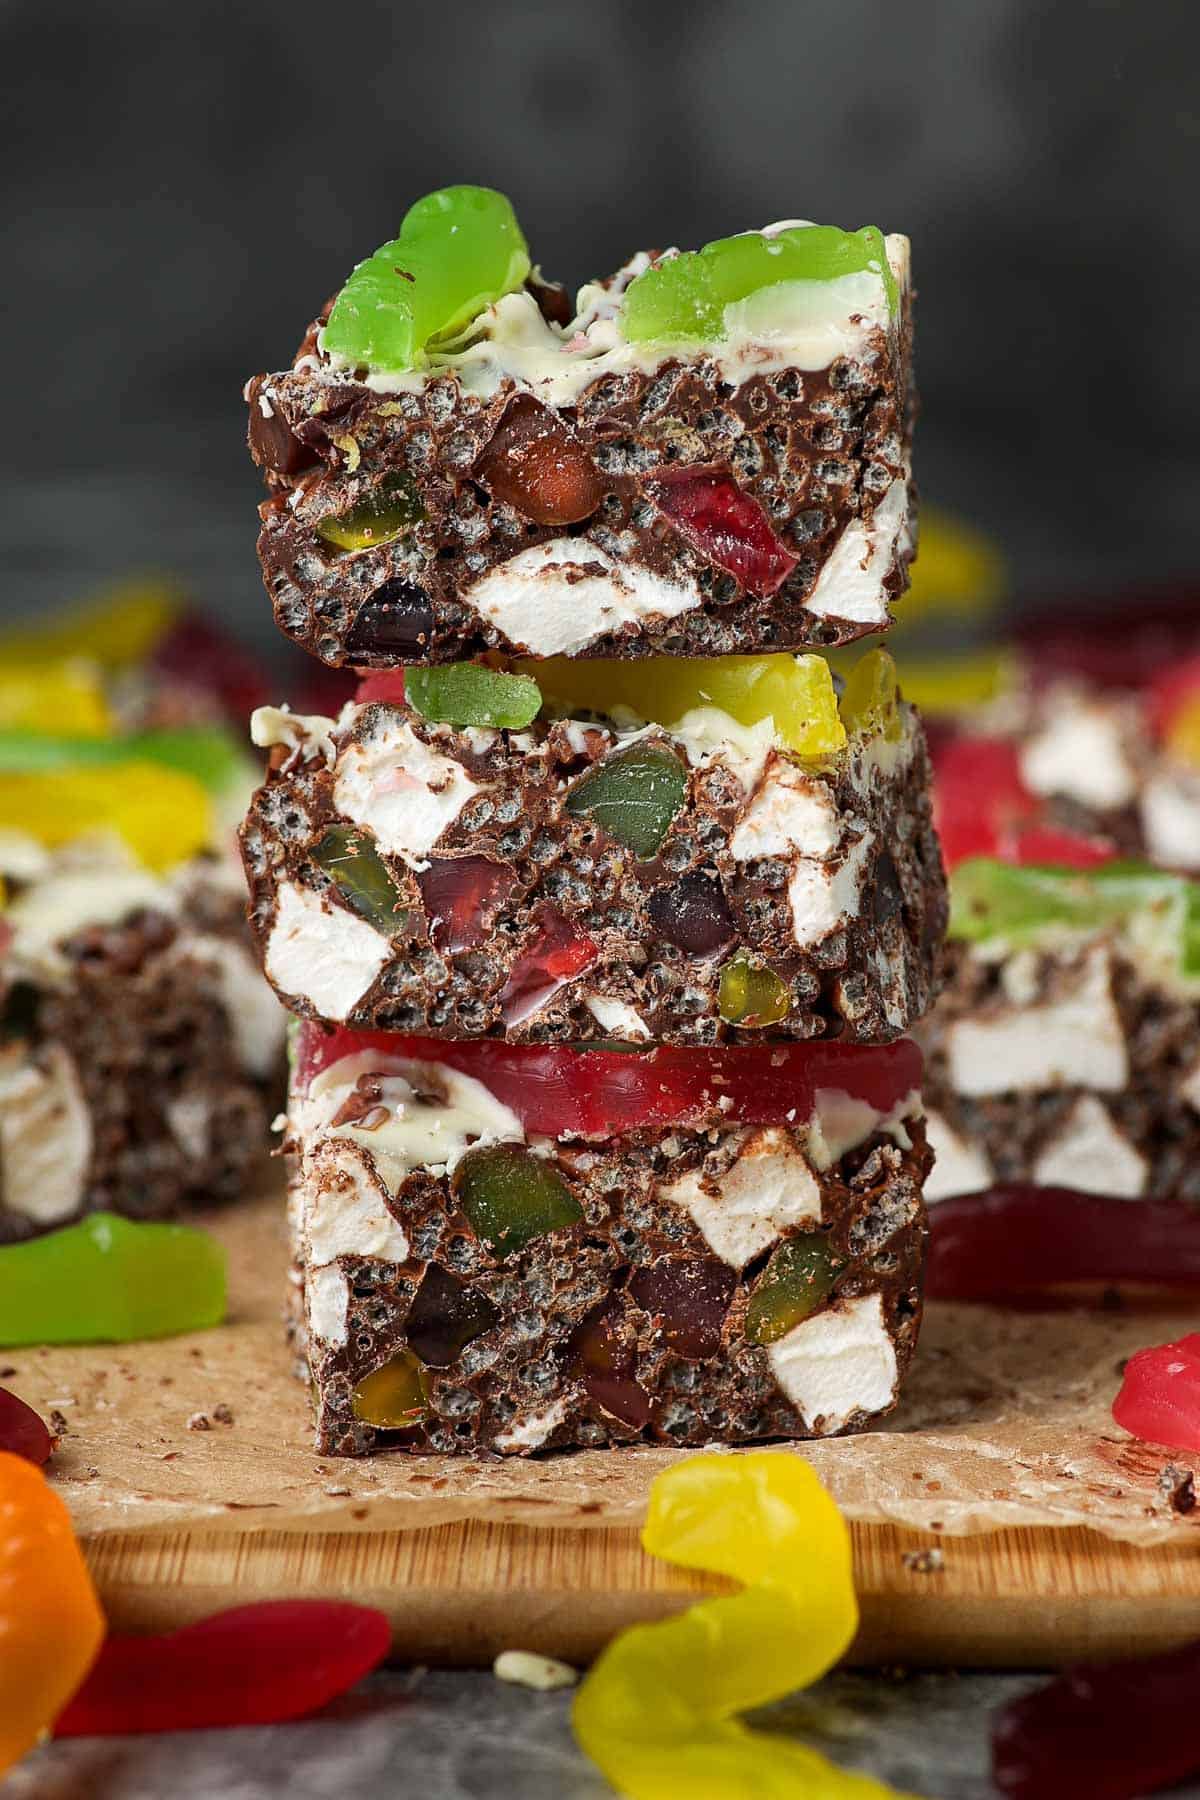 Stack of three pieces of rocky road, sitting on a wooden board.